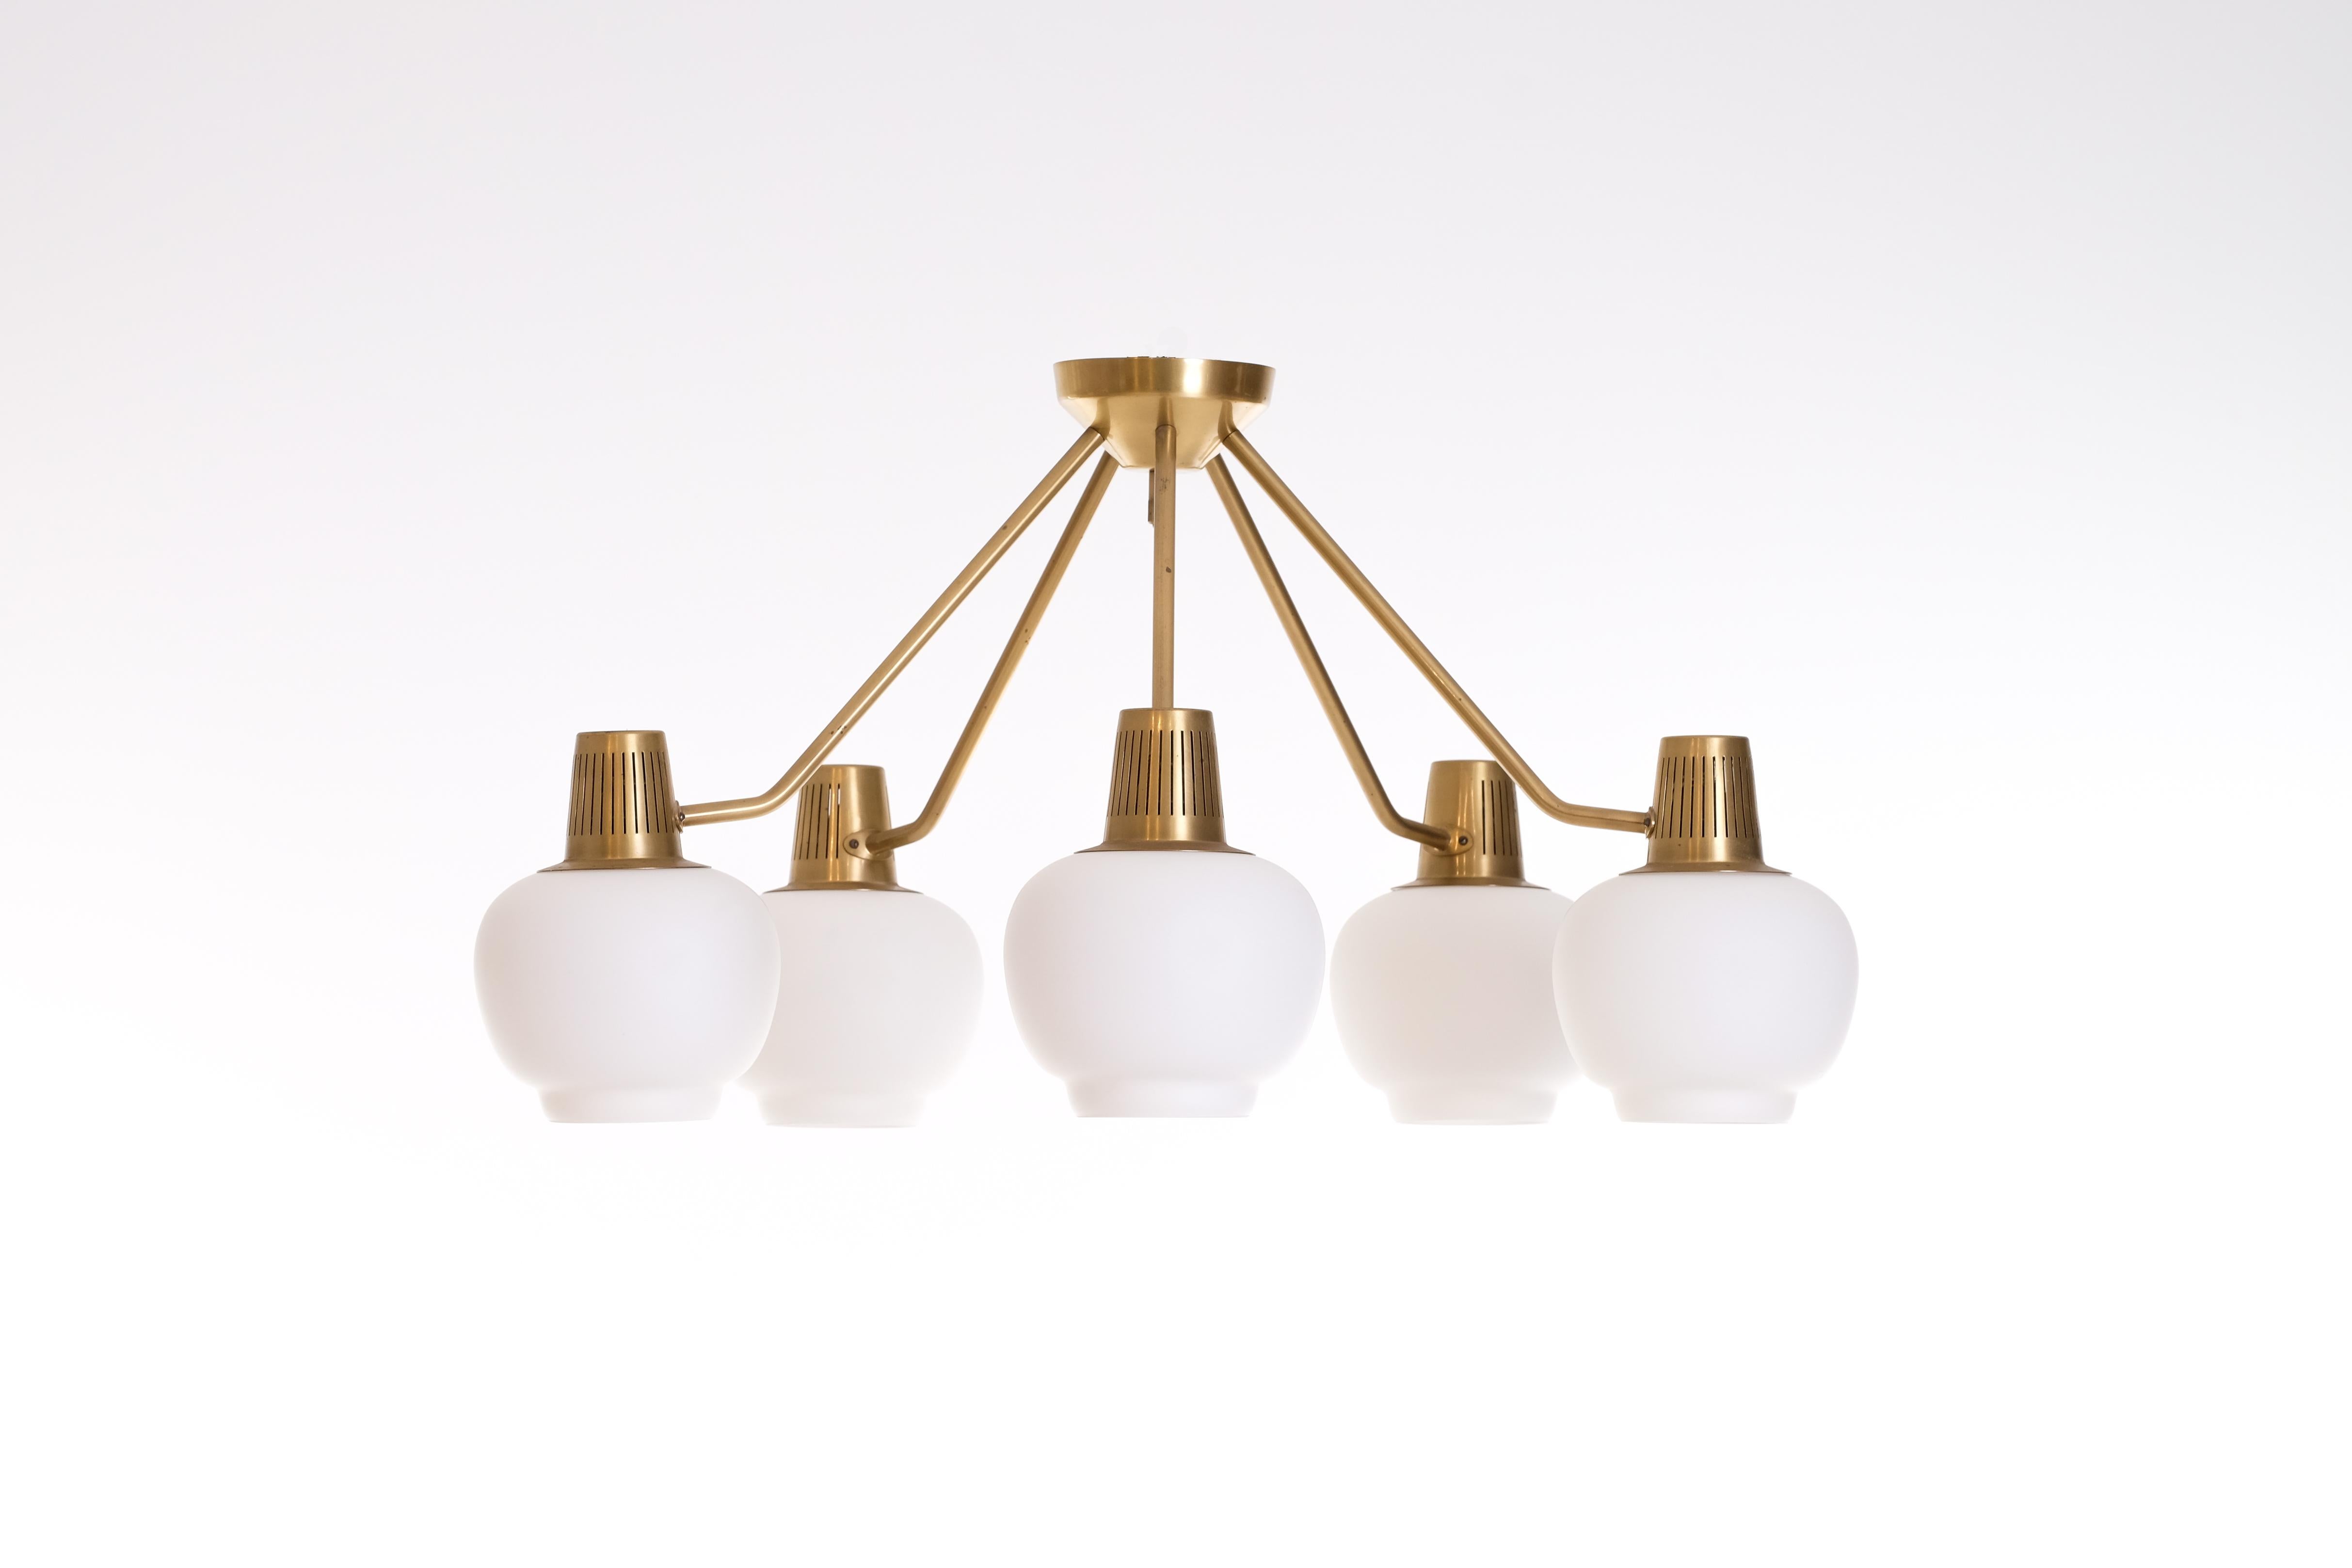 Designed by Hans Bergström. Solid brass and opaline shades.
Produced by Ateljé Lyktan in Åhus, Sweden, 1950s.
2 pieces available.
Please note: listed price is for one (1) lamp.
